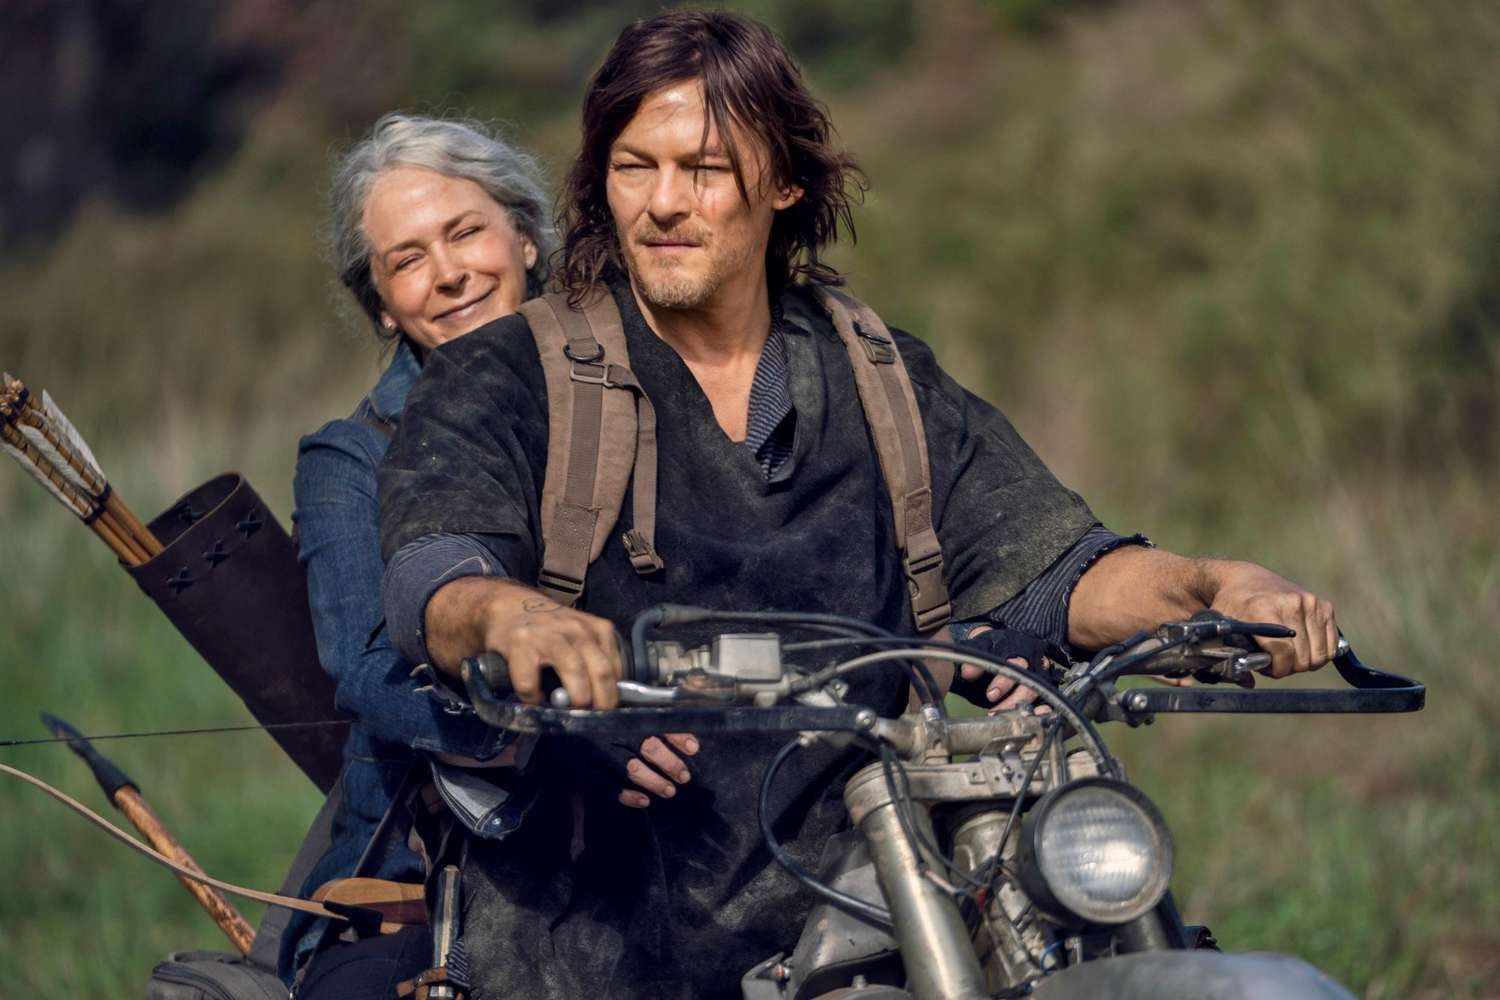 Norman Reedus riding a motorbike in a still from The Walking Dead